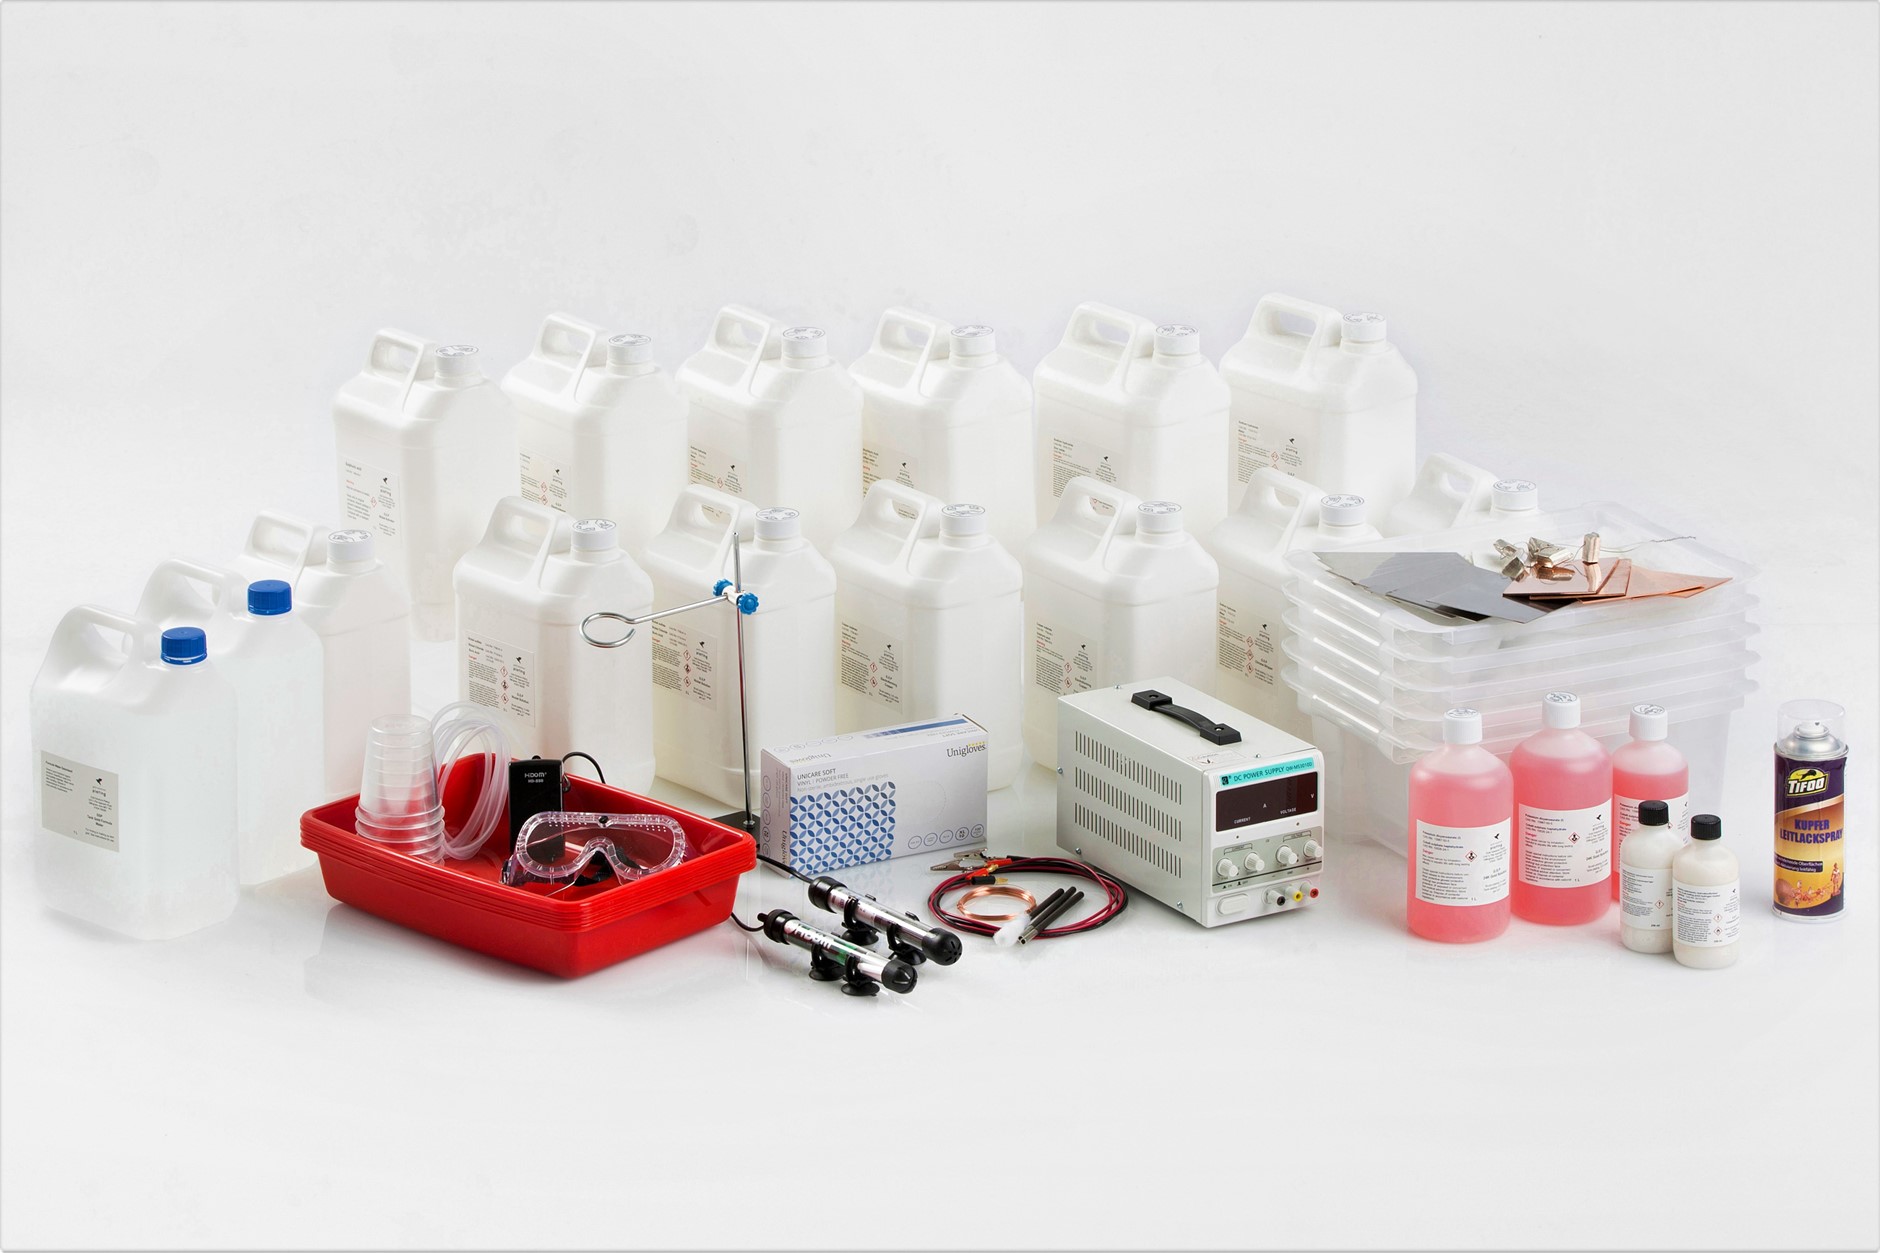 G.S.P Prodigy 10 litre Electroforming and Electroplating Kit Contents